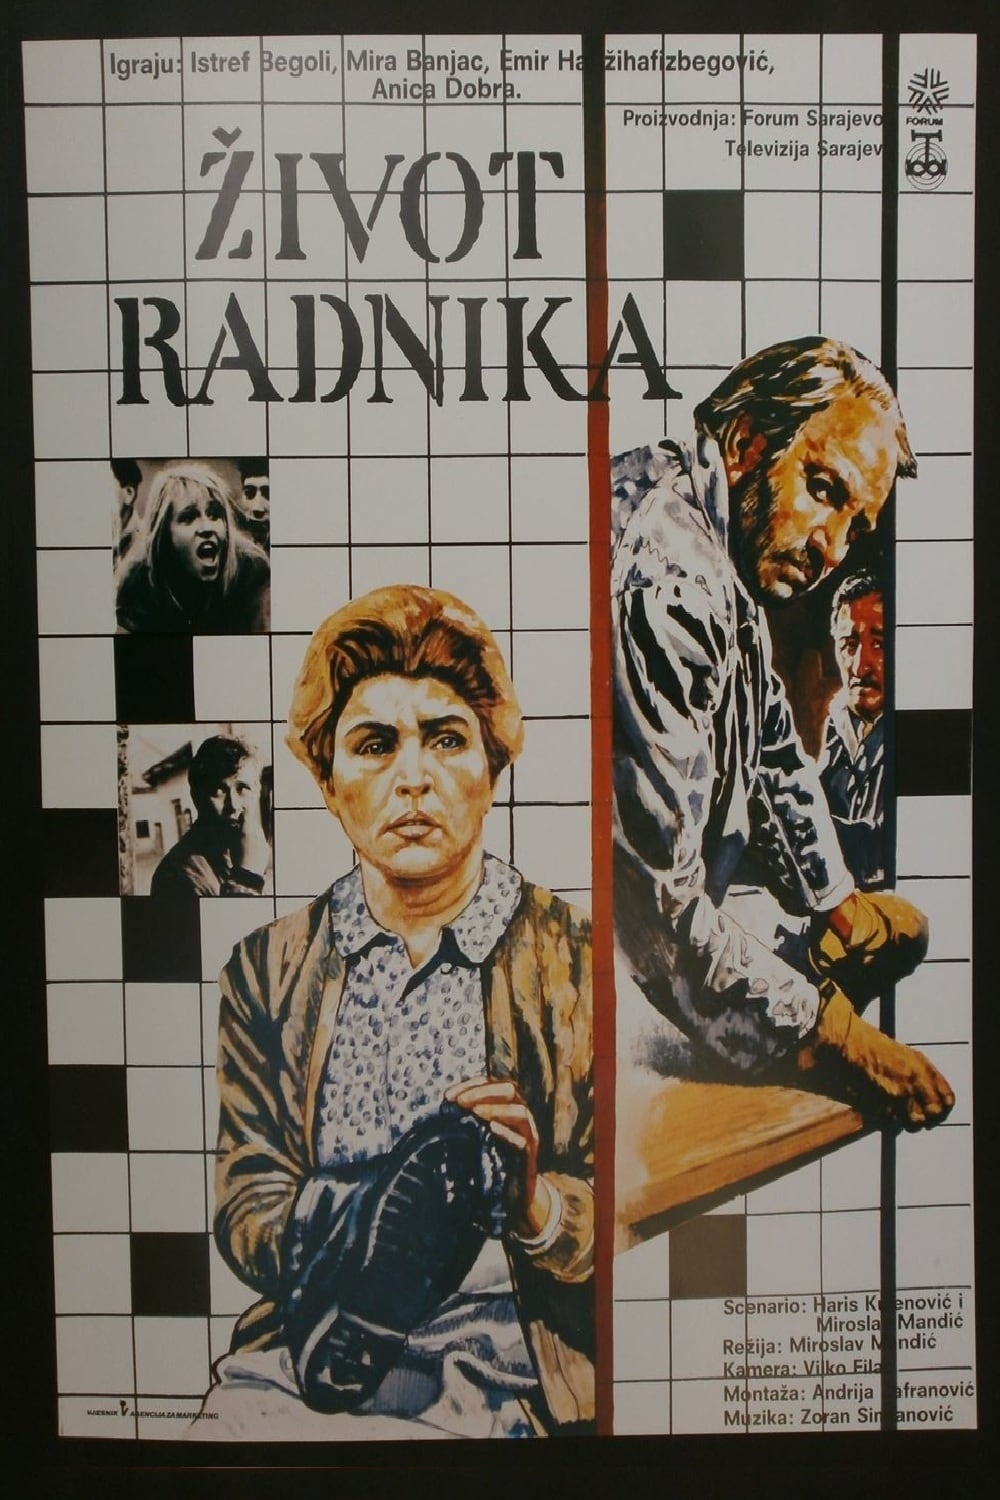 The Worker's Life (1987)